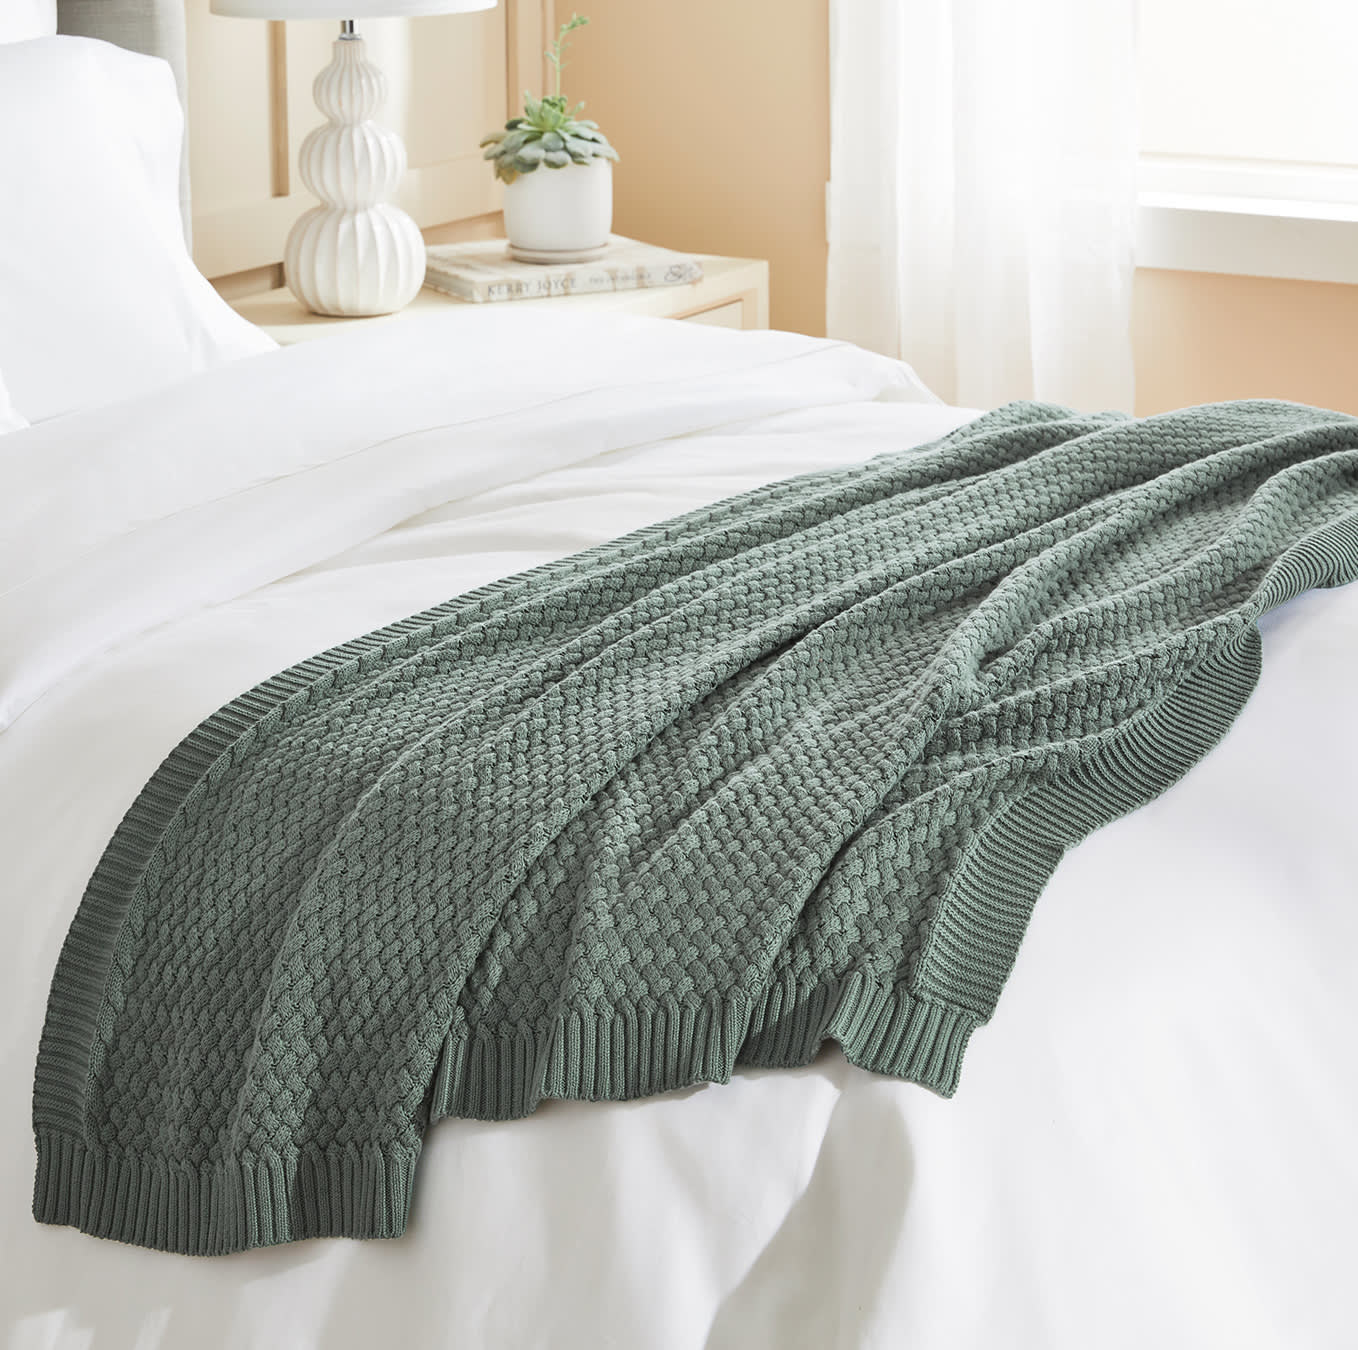 Spruce green knitted blanket atop a bed